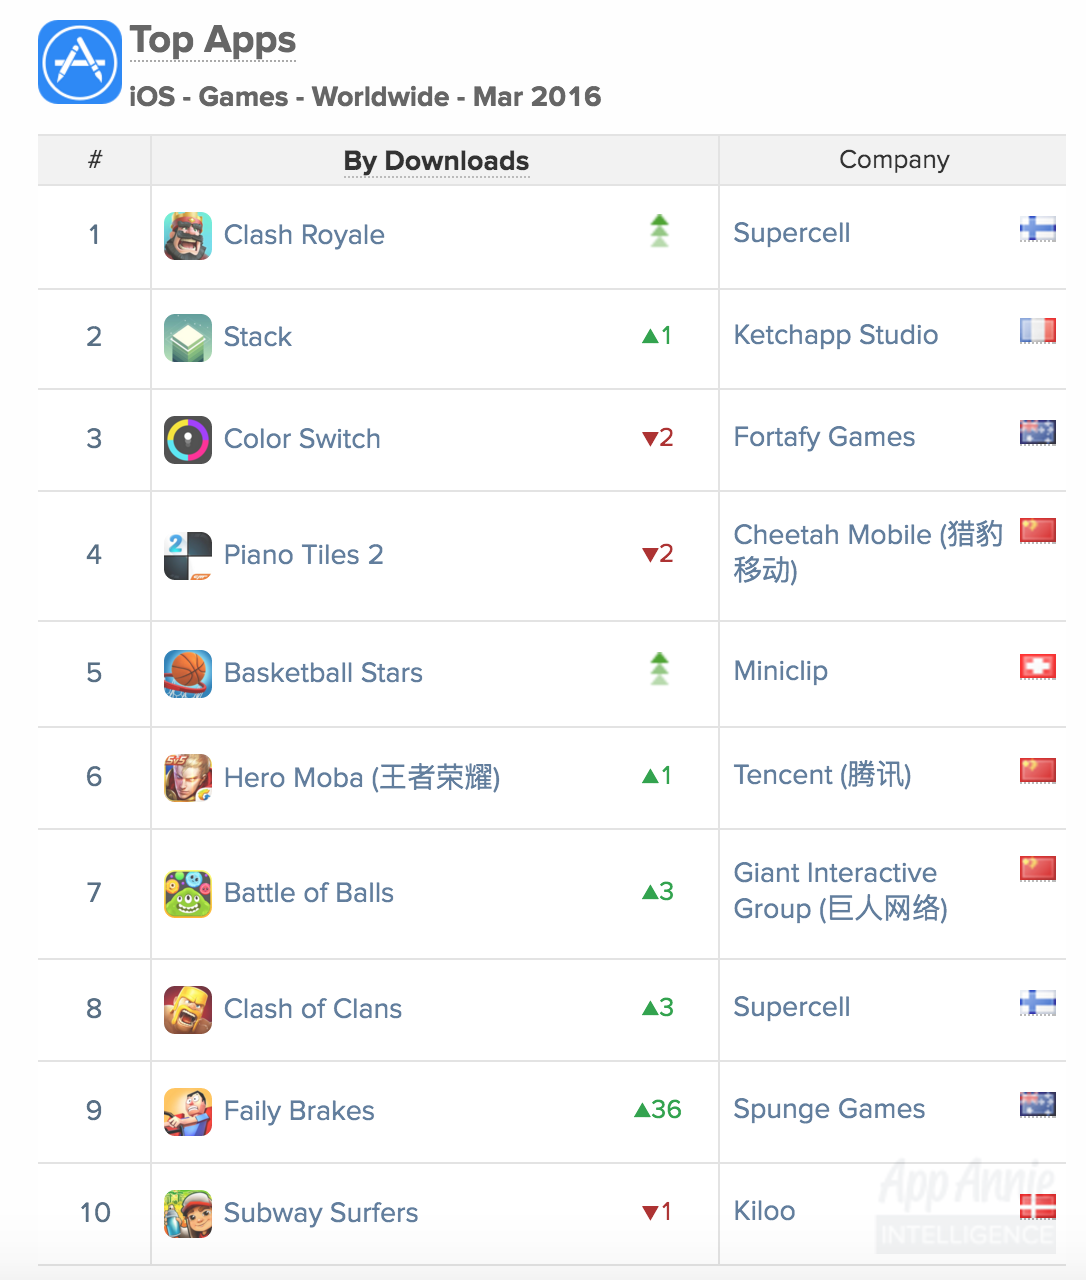 Top Apps iOS Games Worldwide March 2016